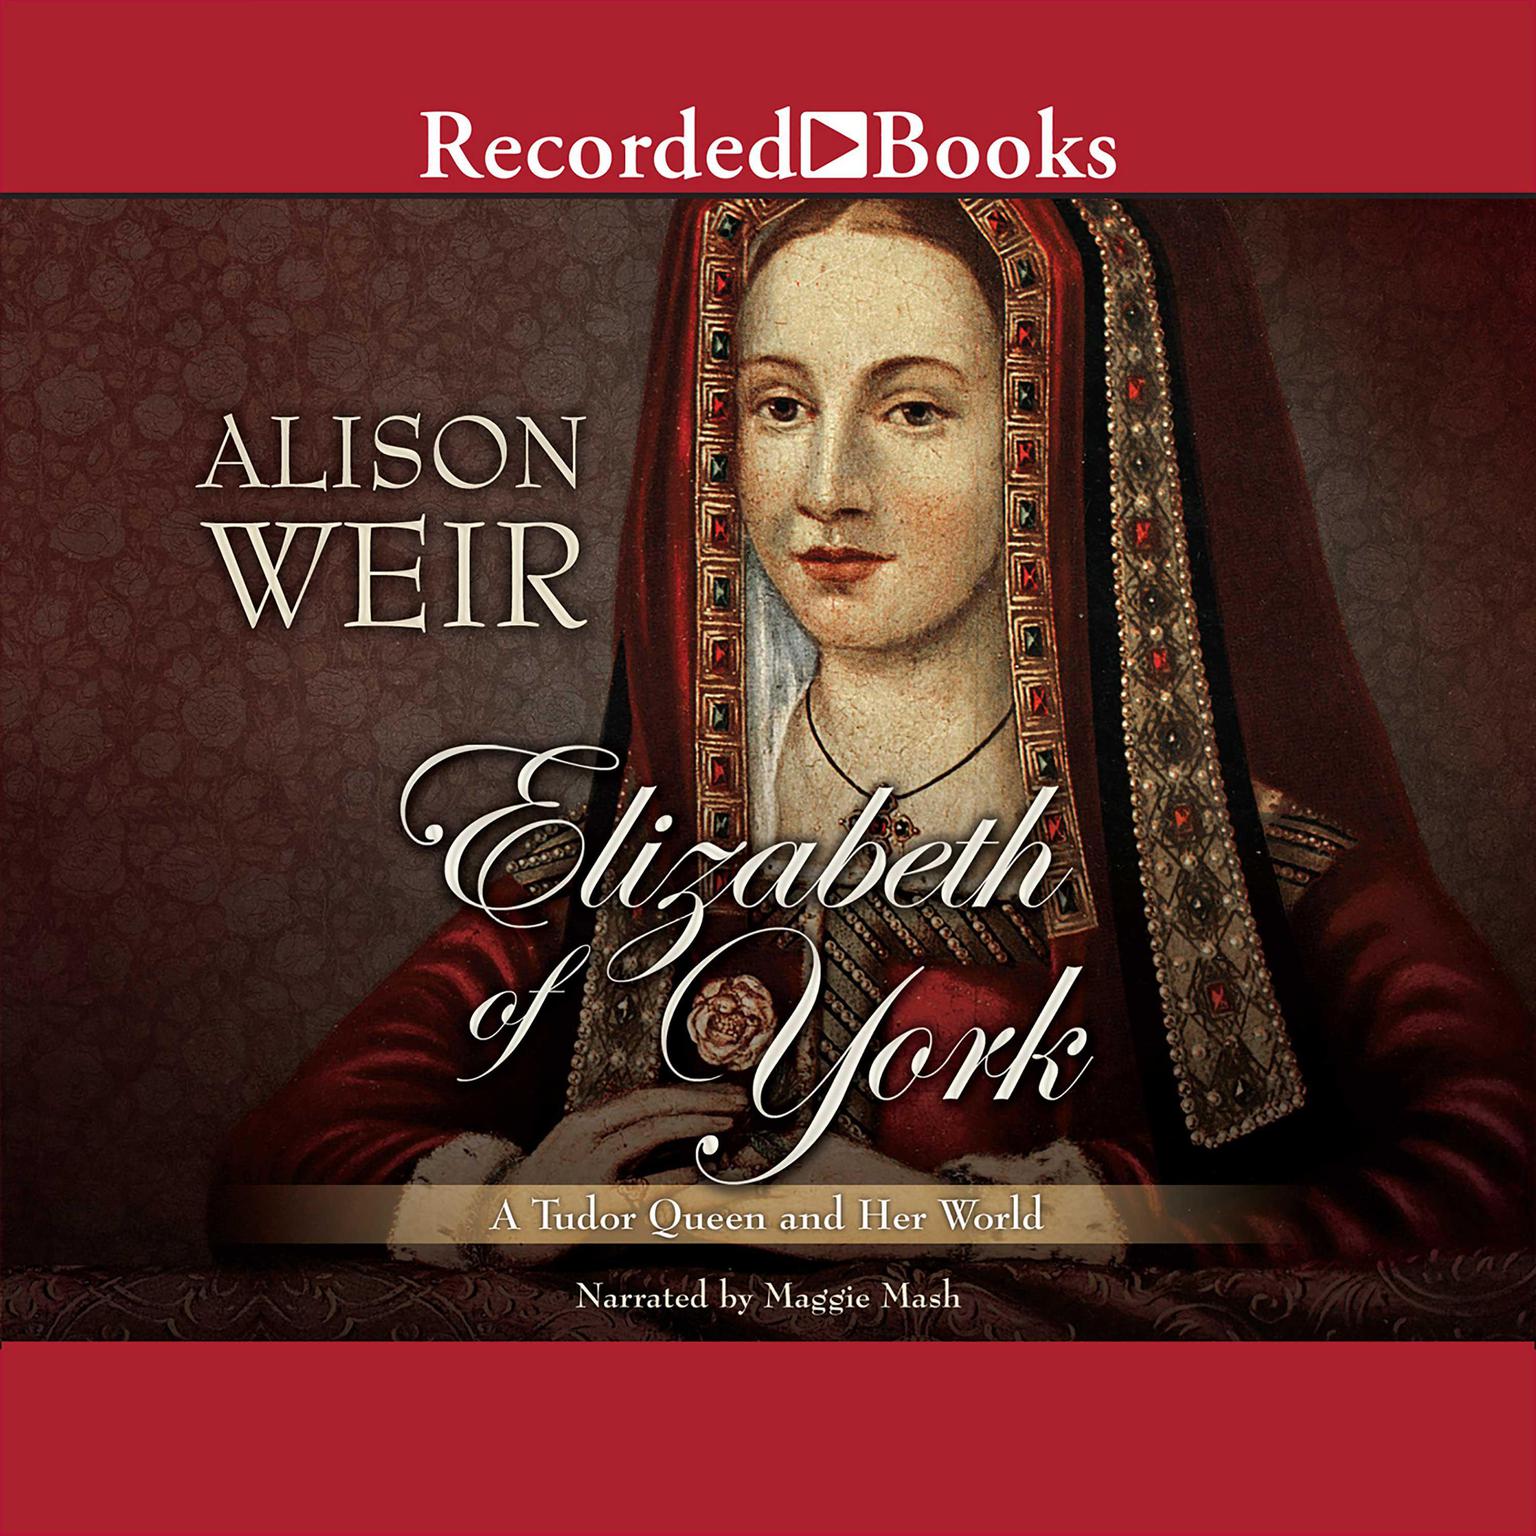 Elizabeth of York: A Tudor Queen and Her World Audiobook, by Alison Weir